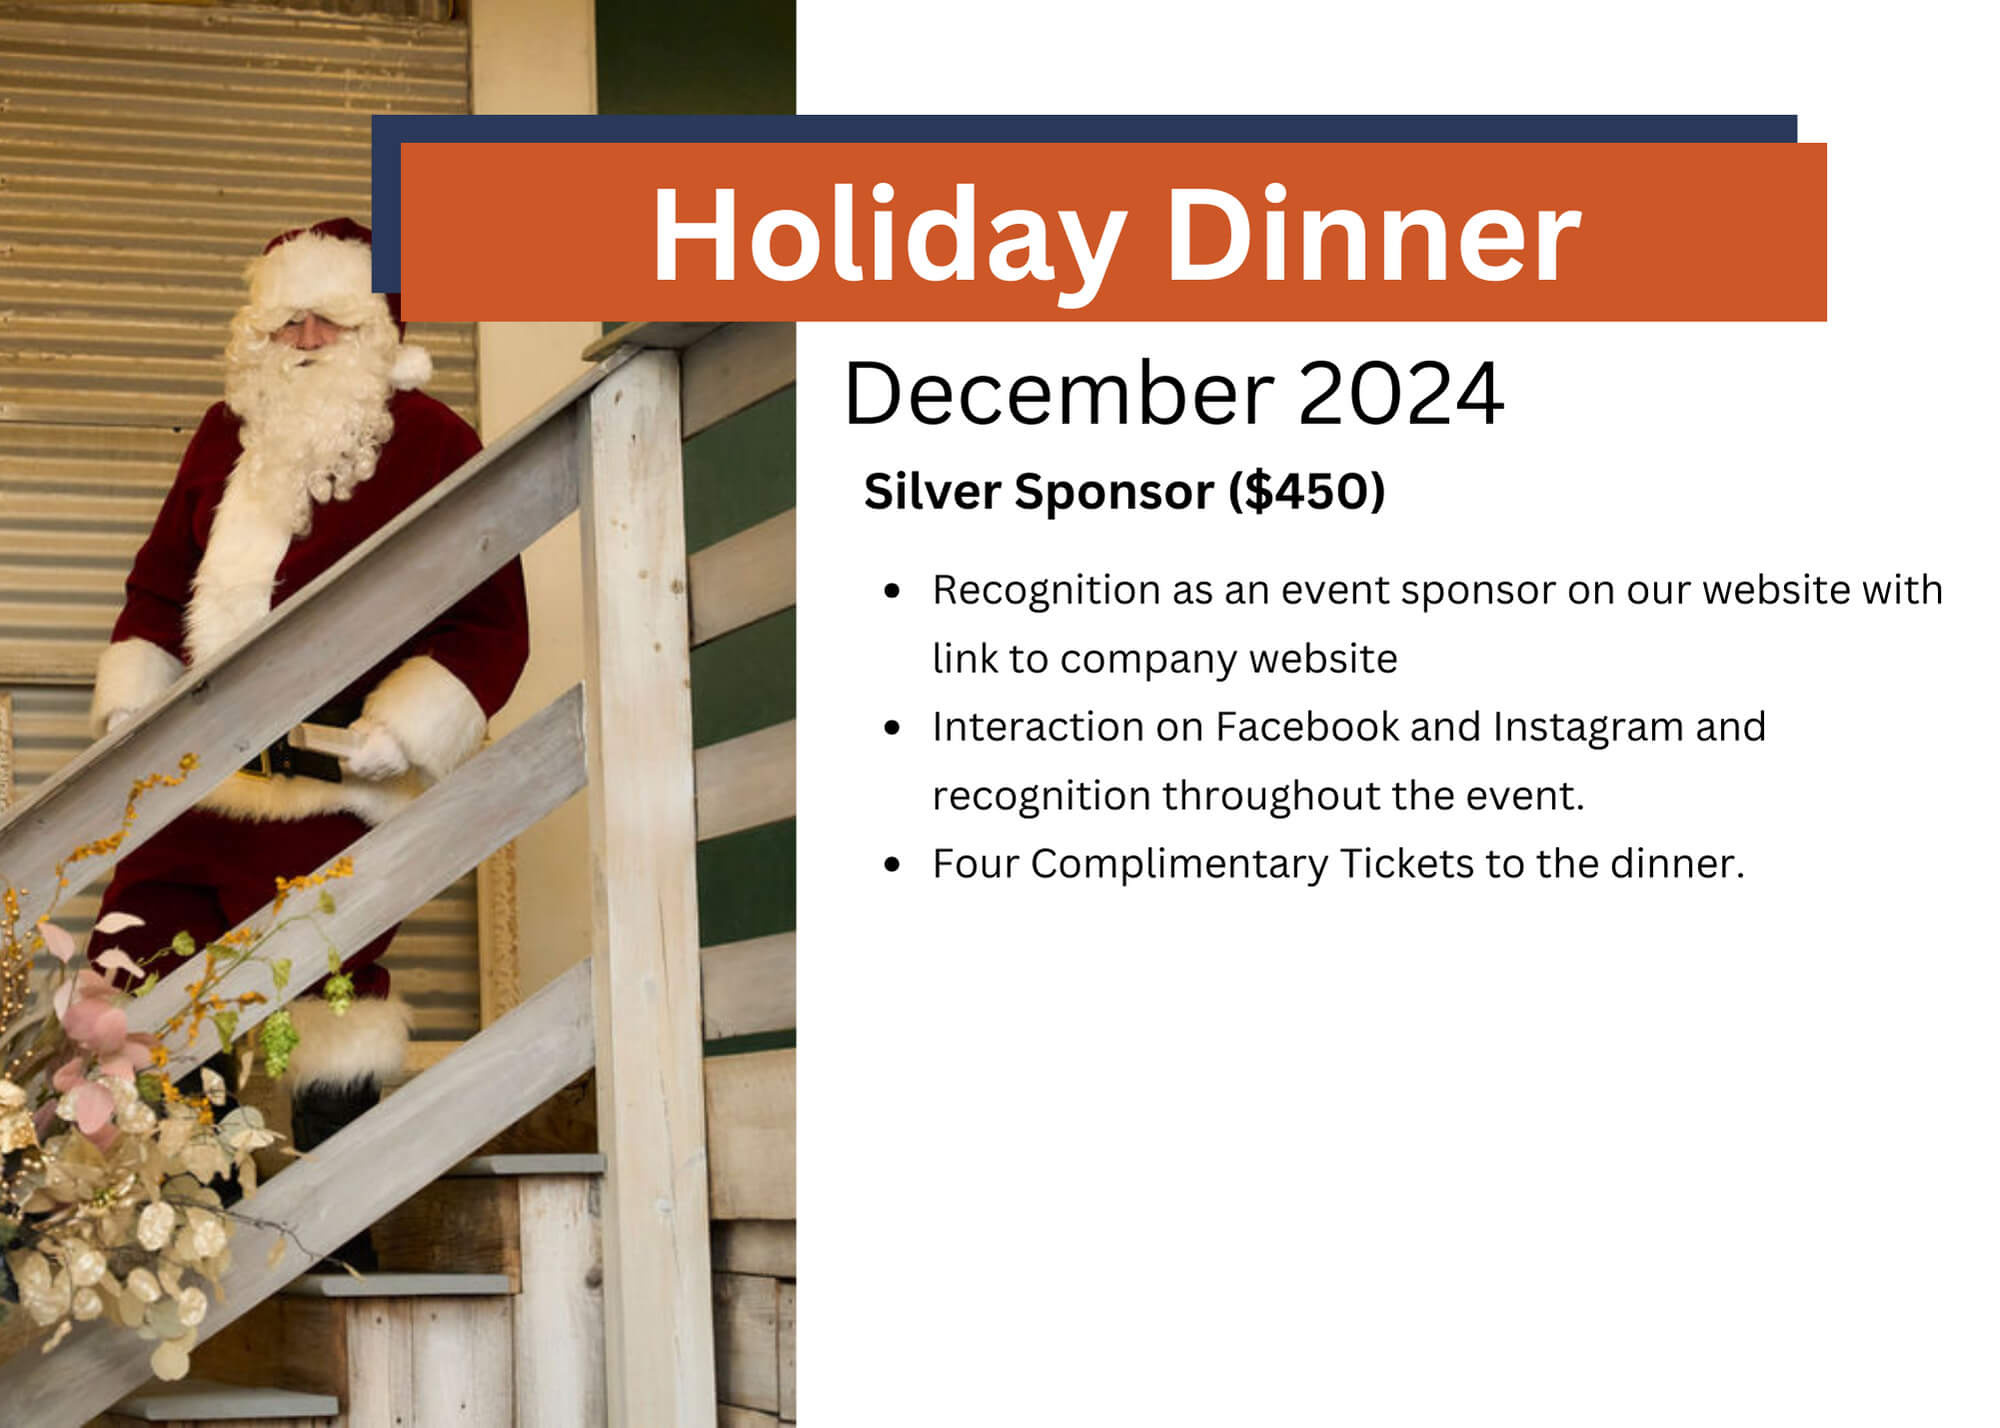 Holiday Dinner, Silver